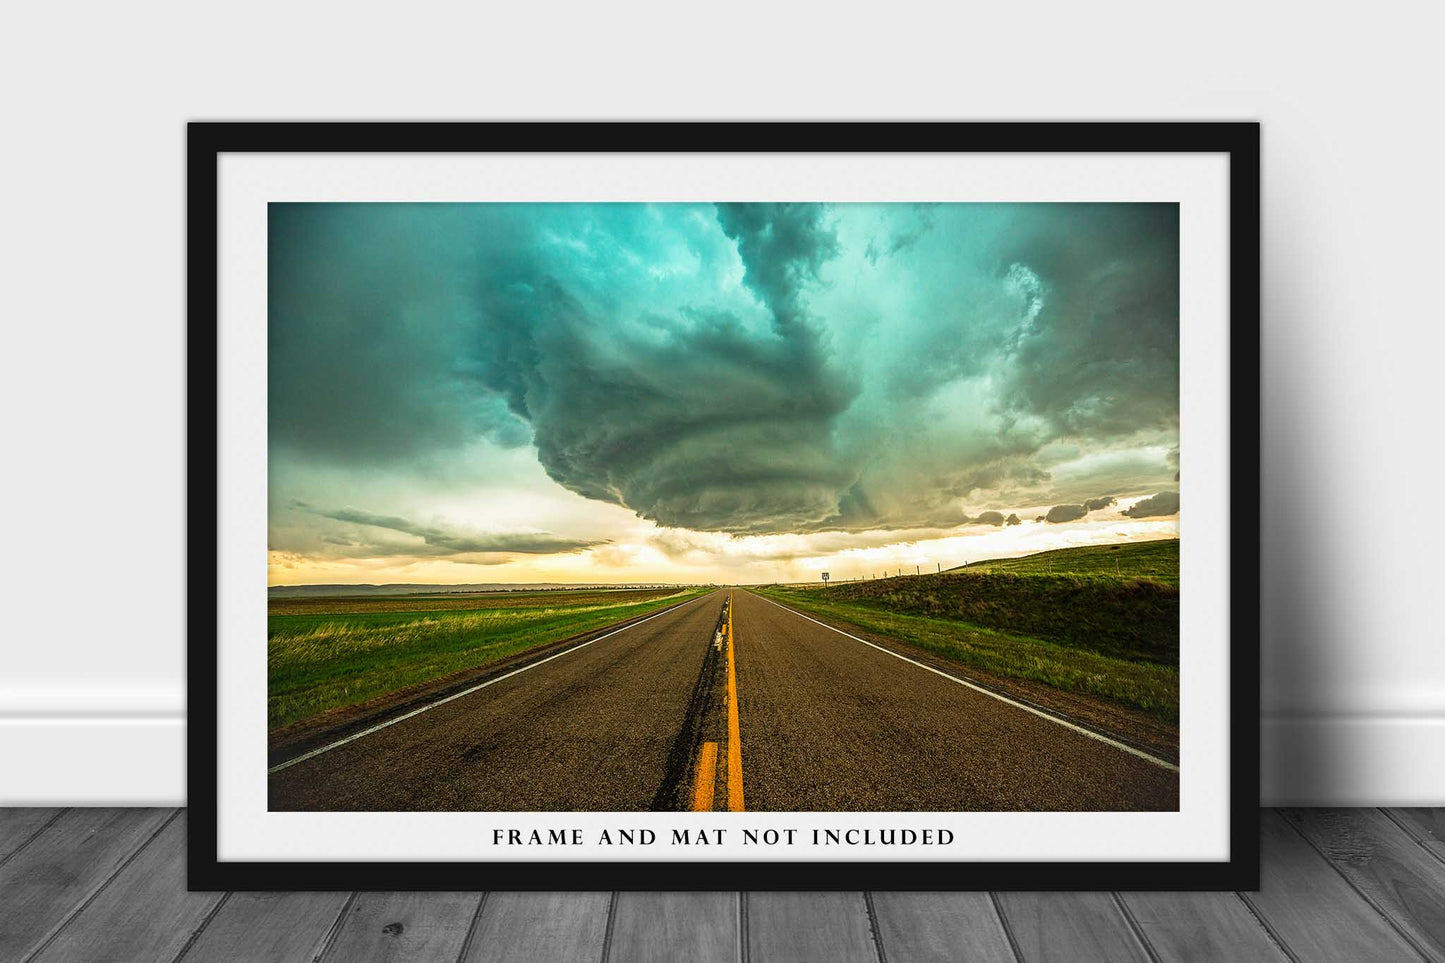 Storm Photography Print (Not Framed) Picture of Supercell Thunderstorm Over Highway in Nebraska Weather Wall Art Adventure Decor